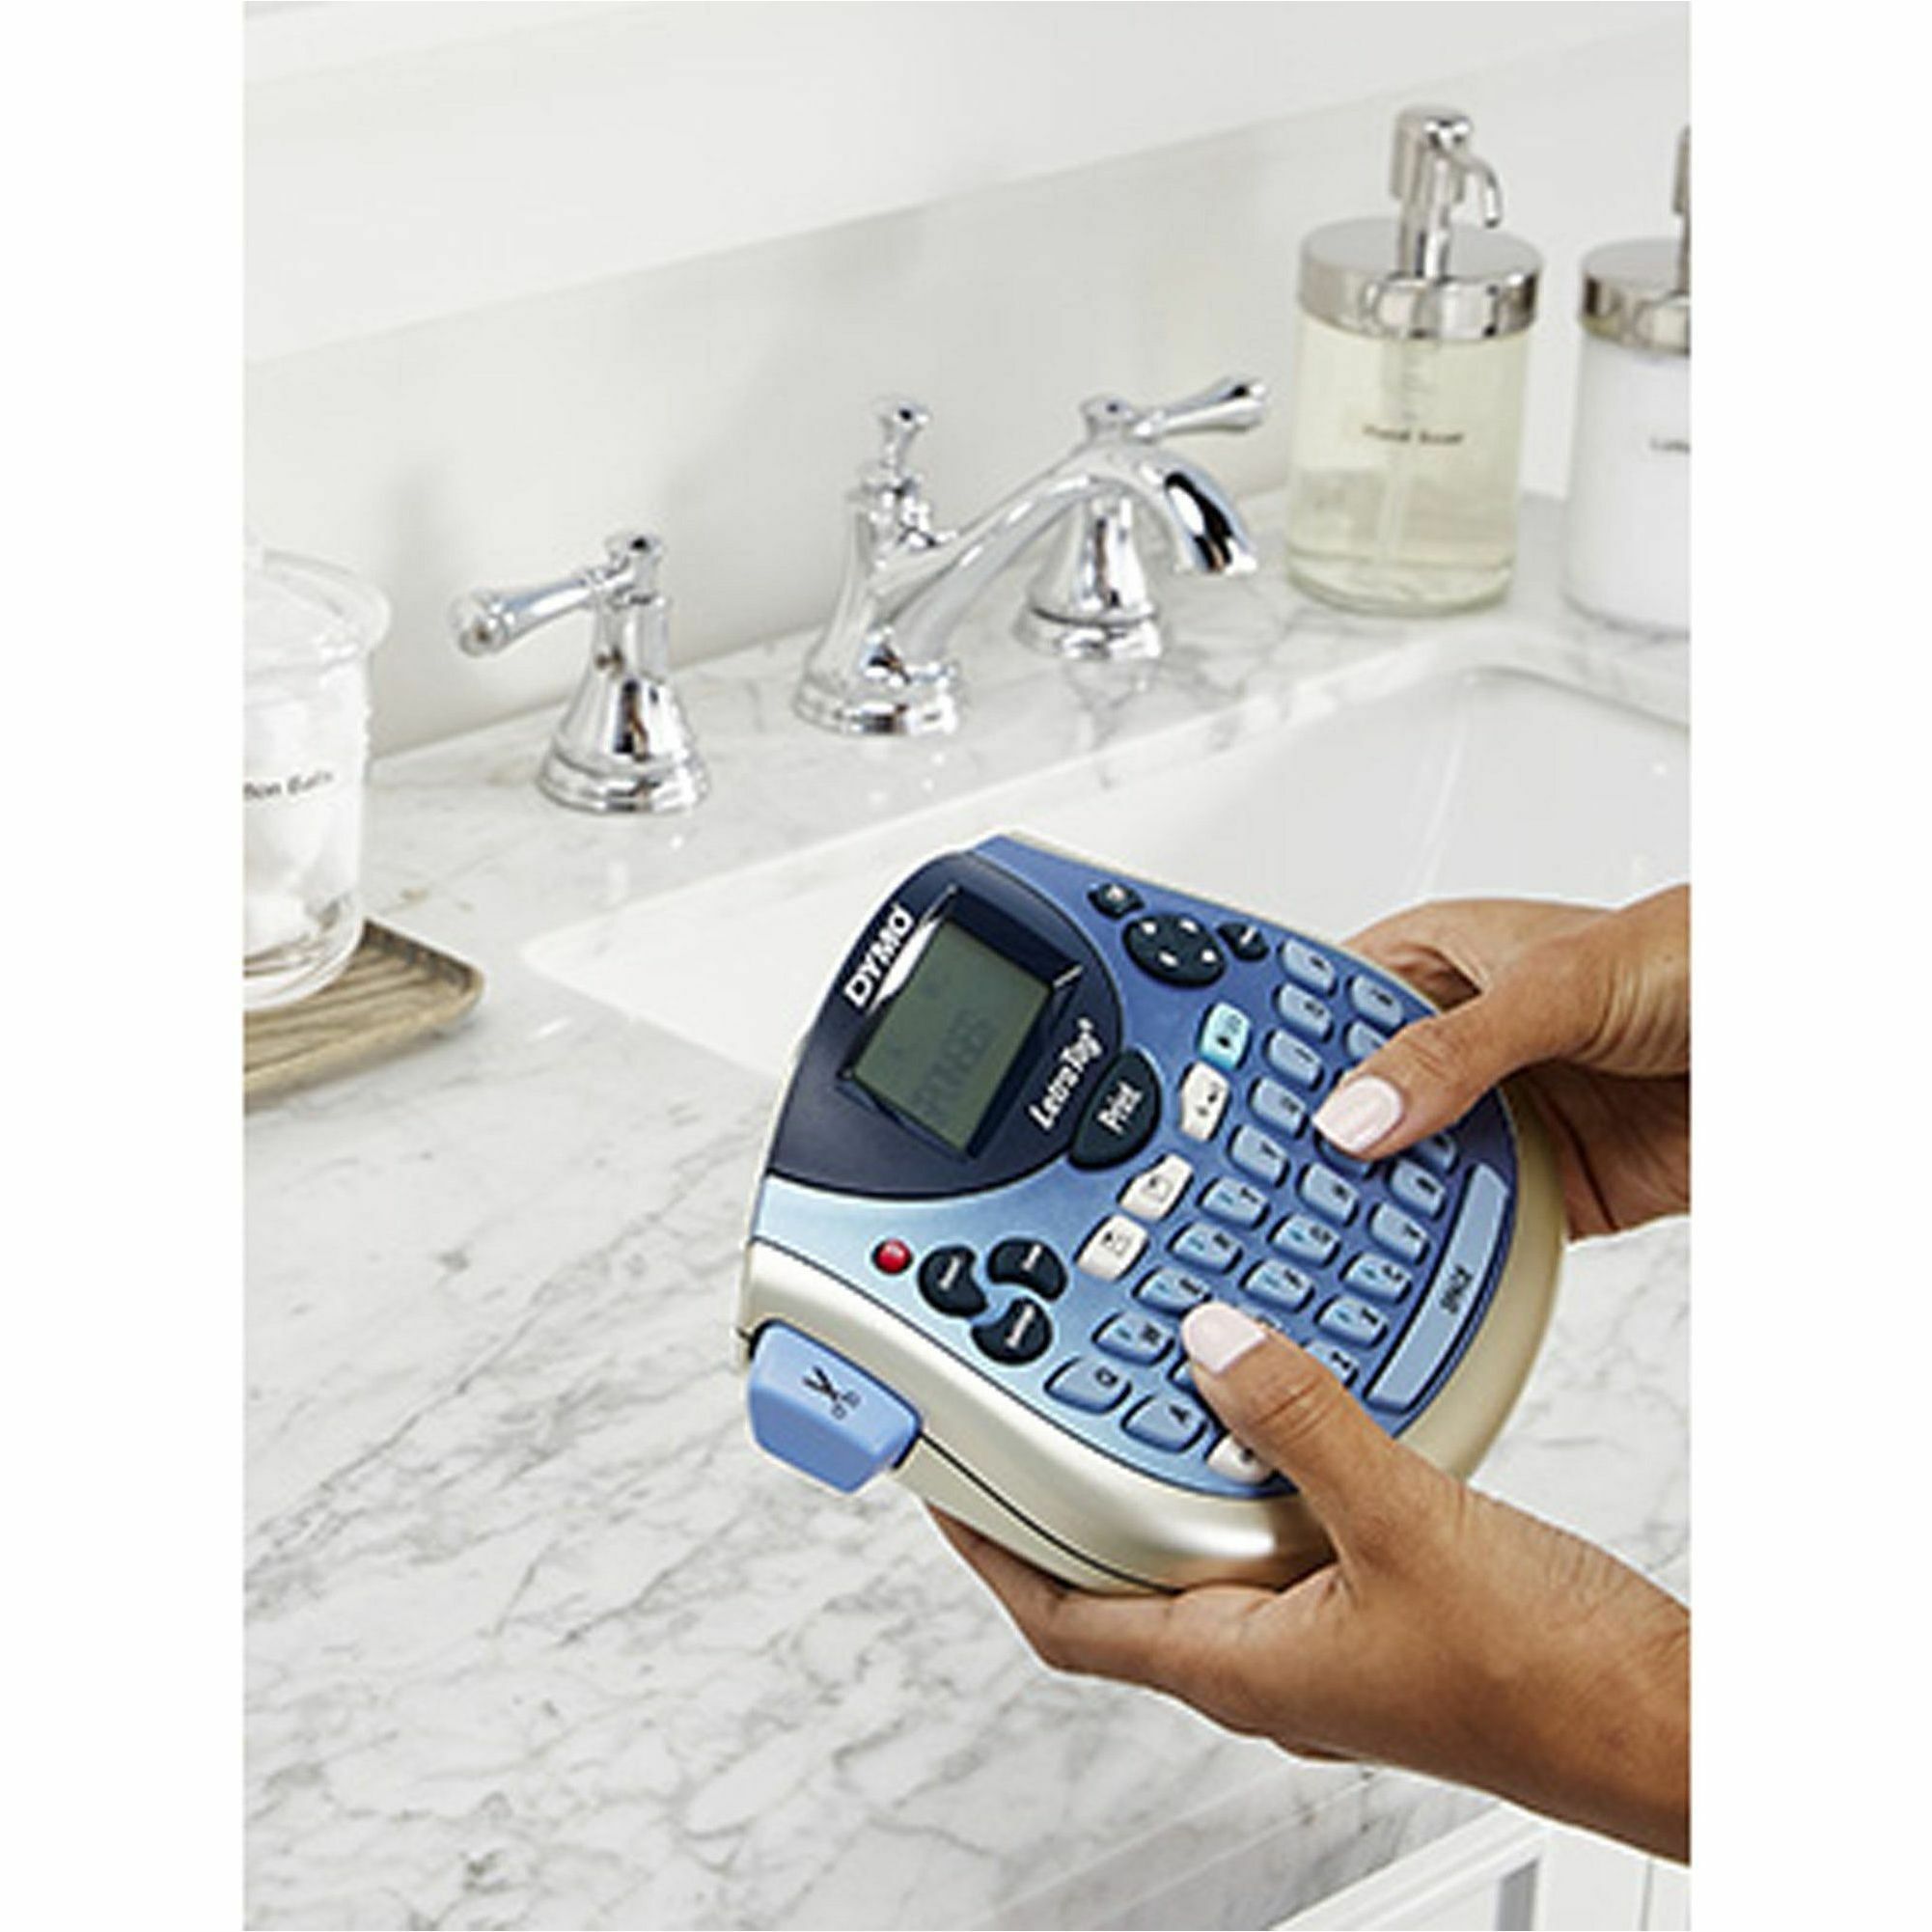 DYMO LetraTag 100H Plus Handheld Label Maker for Office or Home